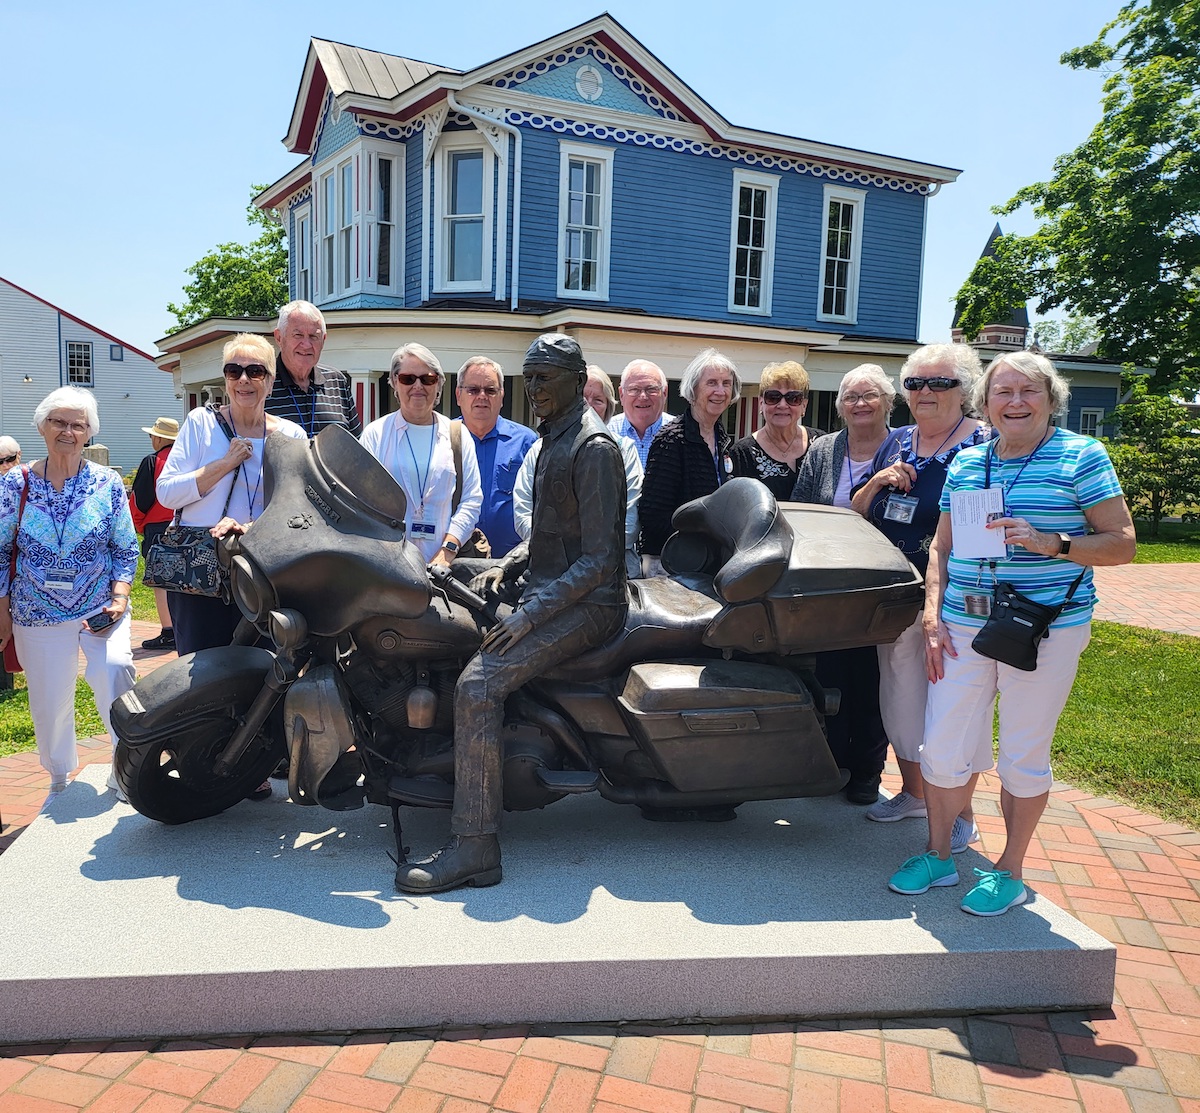 Group Tour at Oldham County History Center in Kentucky